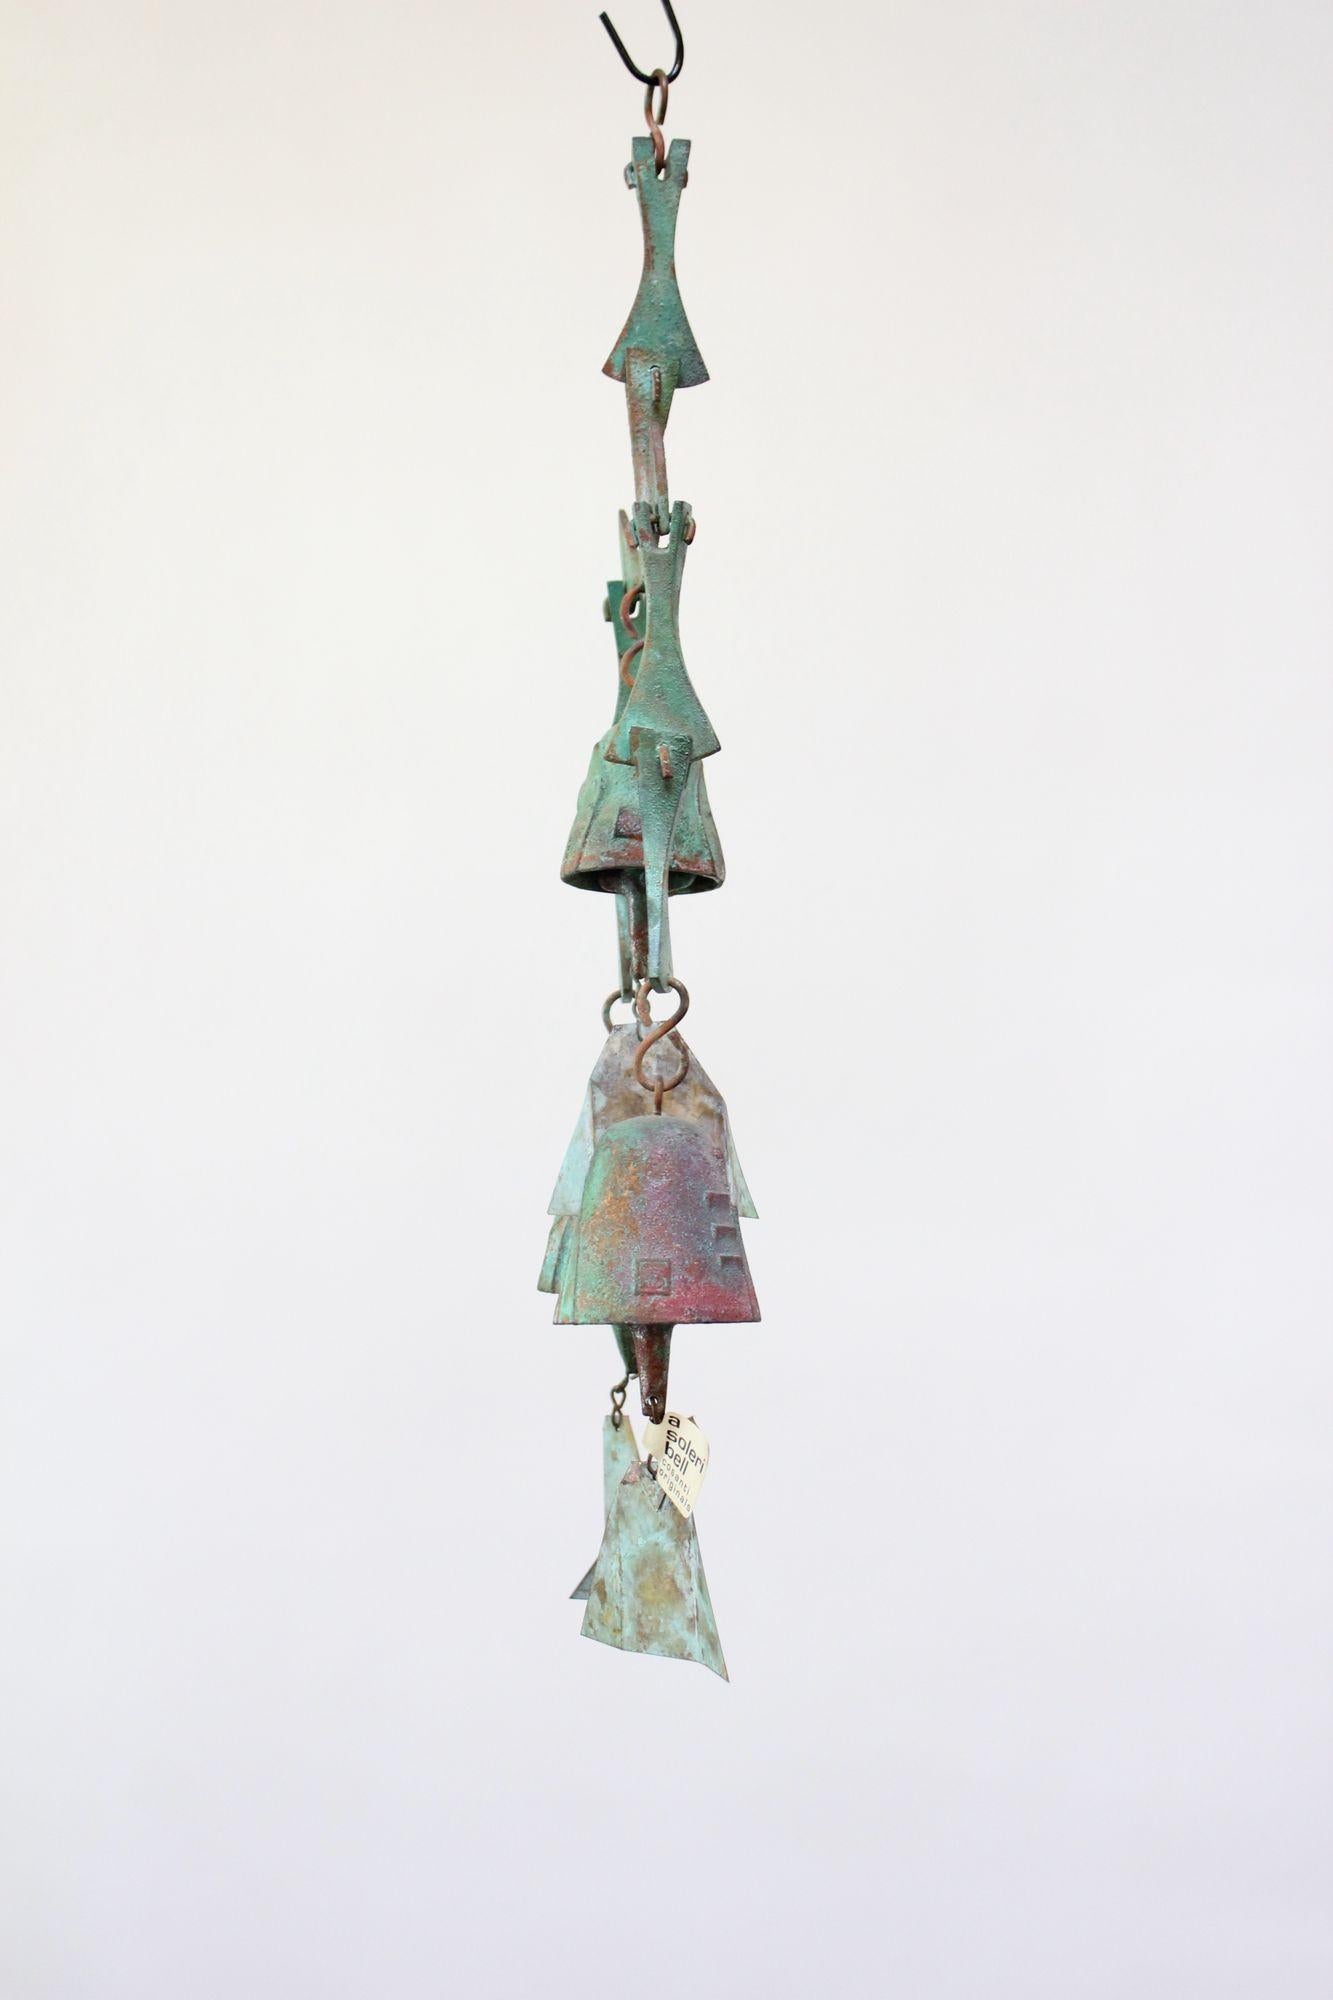 Three bell/fin wind chime designed by architect, Paolo Soleri for Cosanti Originals (1970s, Arizona, USA).
Bronze cast elements with verdigris patina and multi-color pigment throughout.
Unique, given its early production and the colors